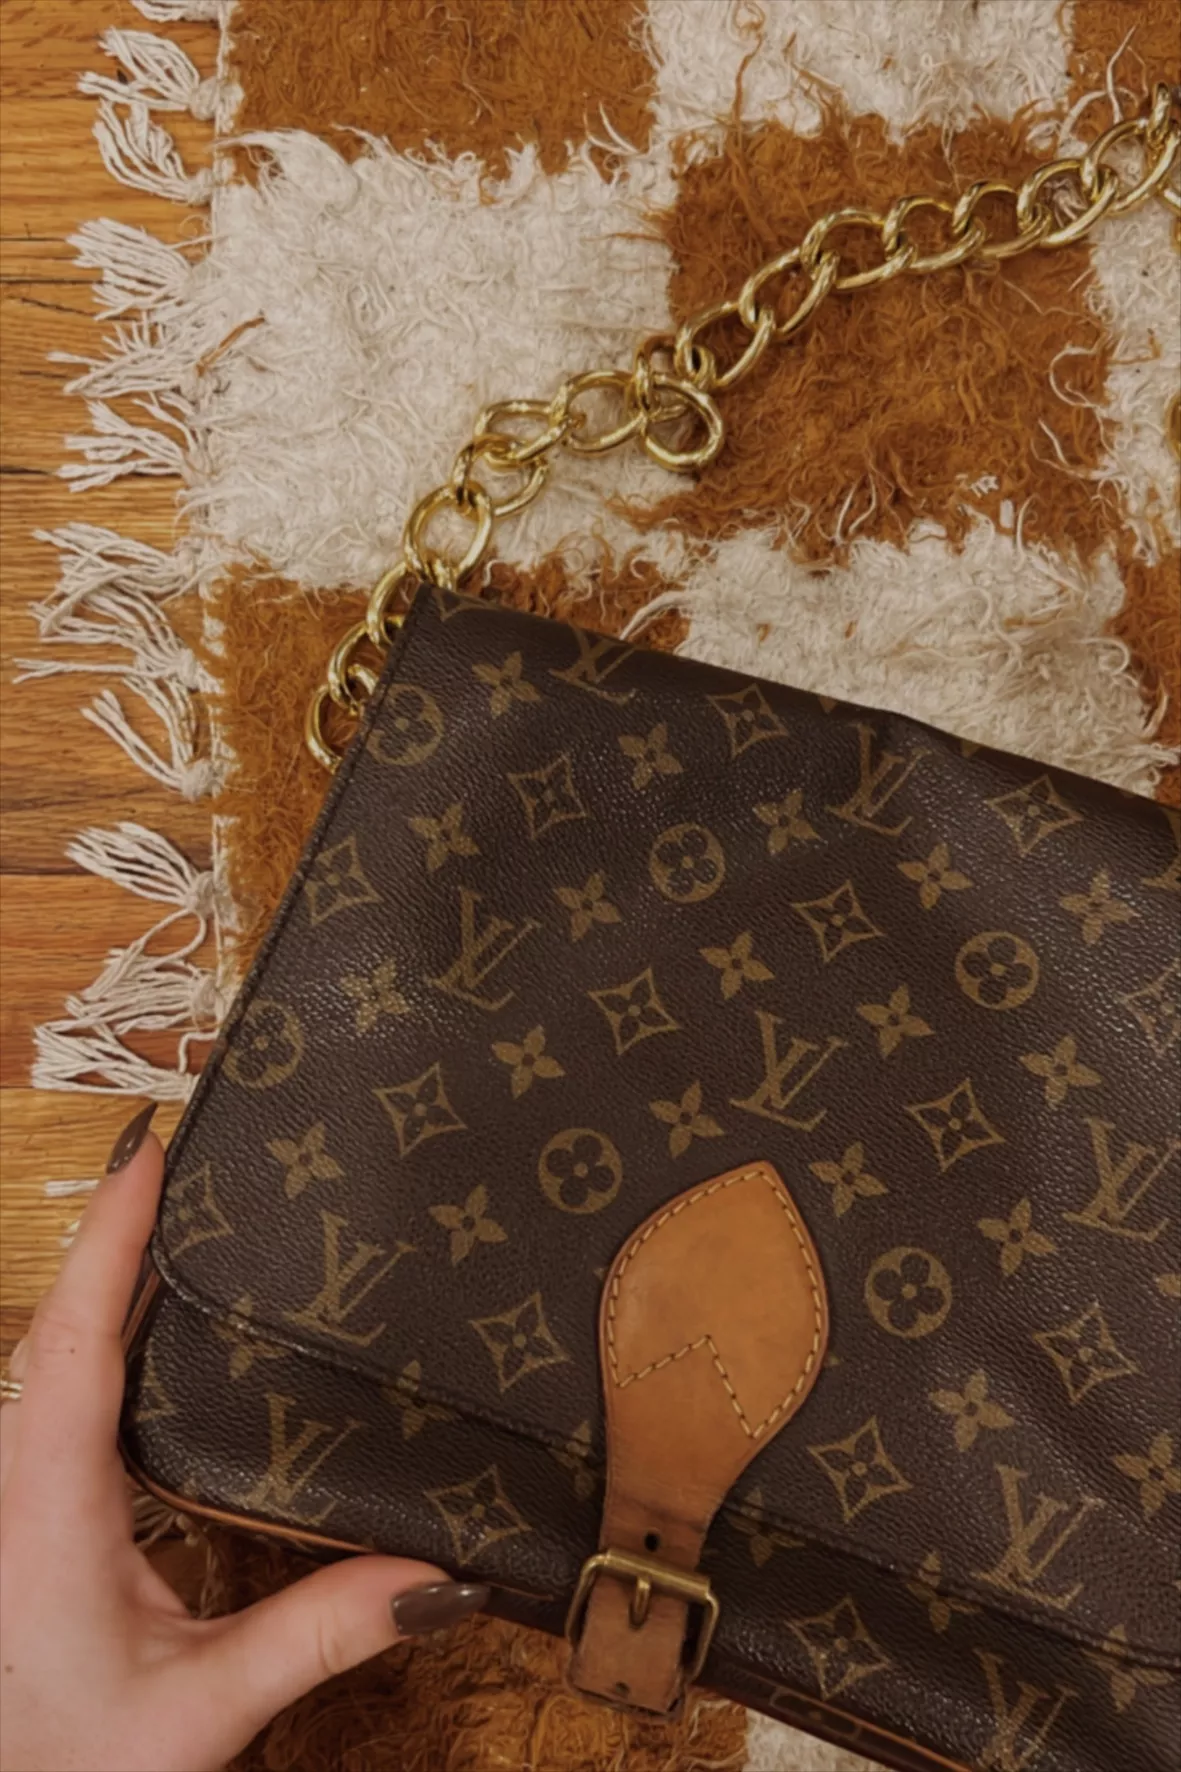 Anyone know the name of this vintage LV bag? I thought it was a